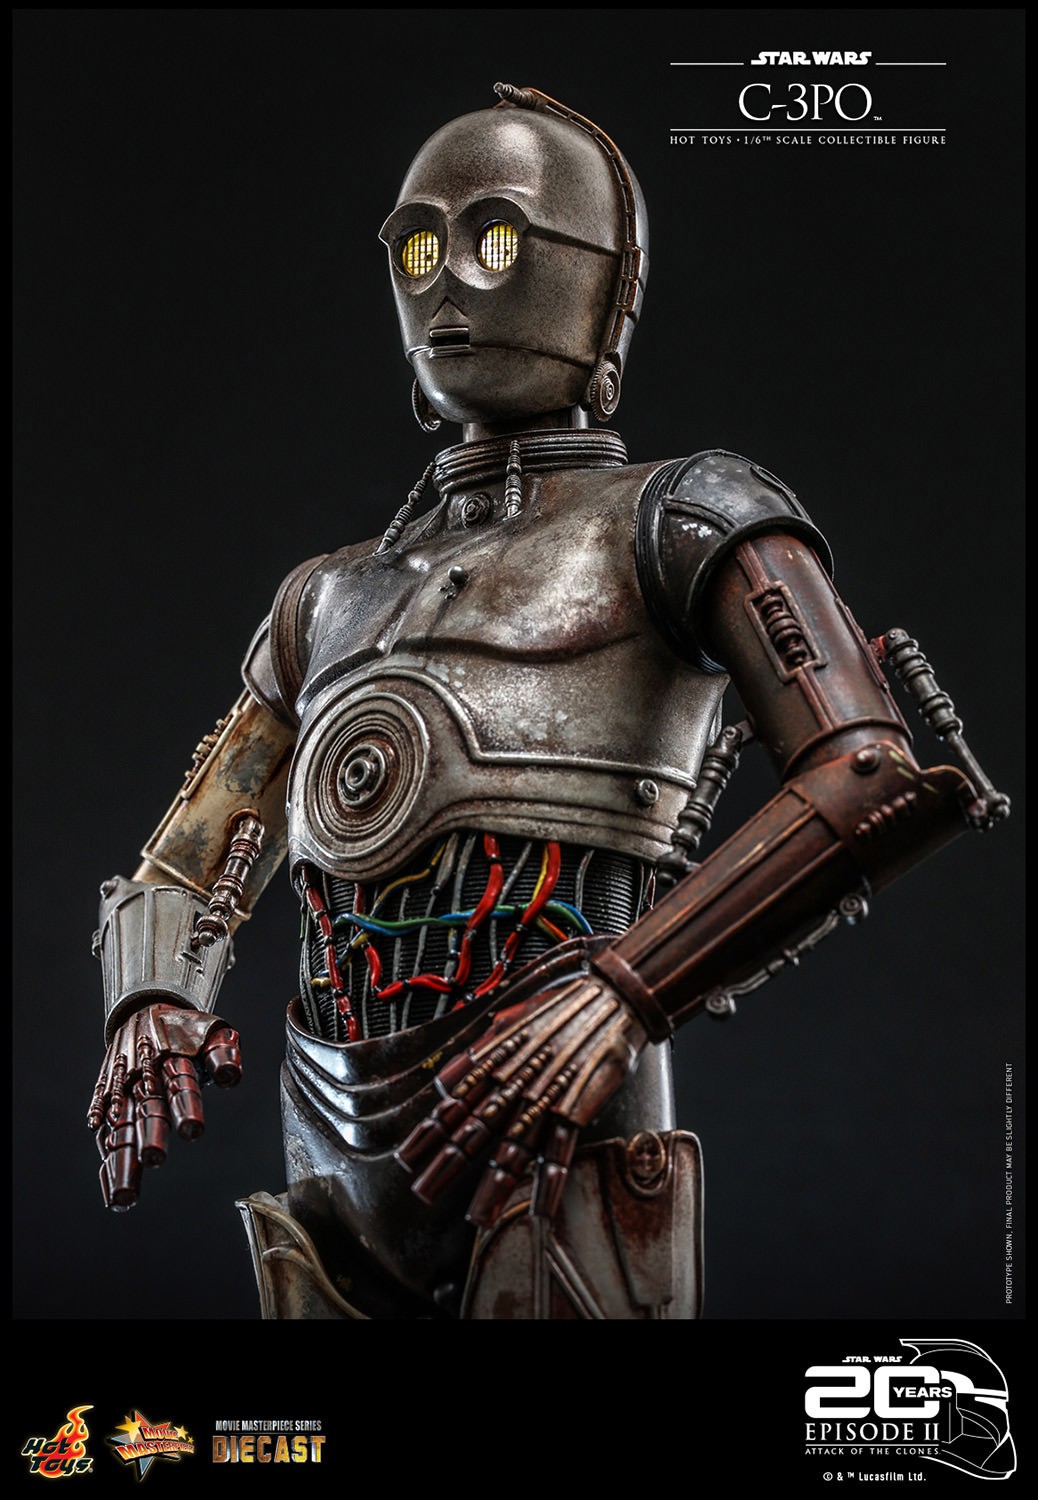 C-3PO Sixth Scale Figure by Hot Toys | Sideshow Collectibles